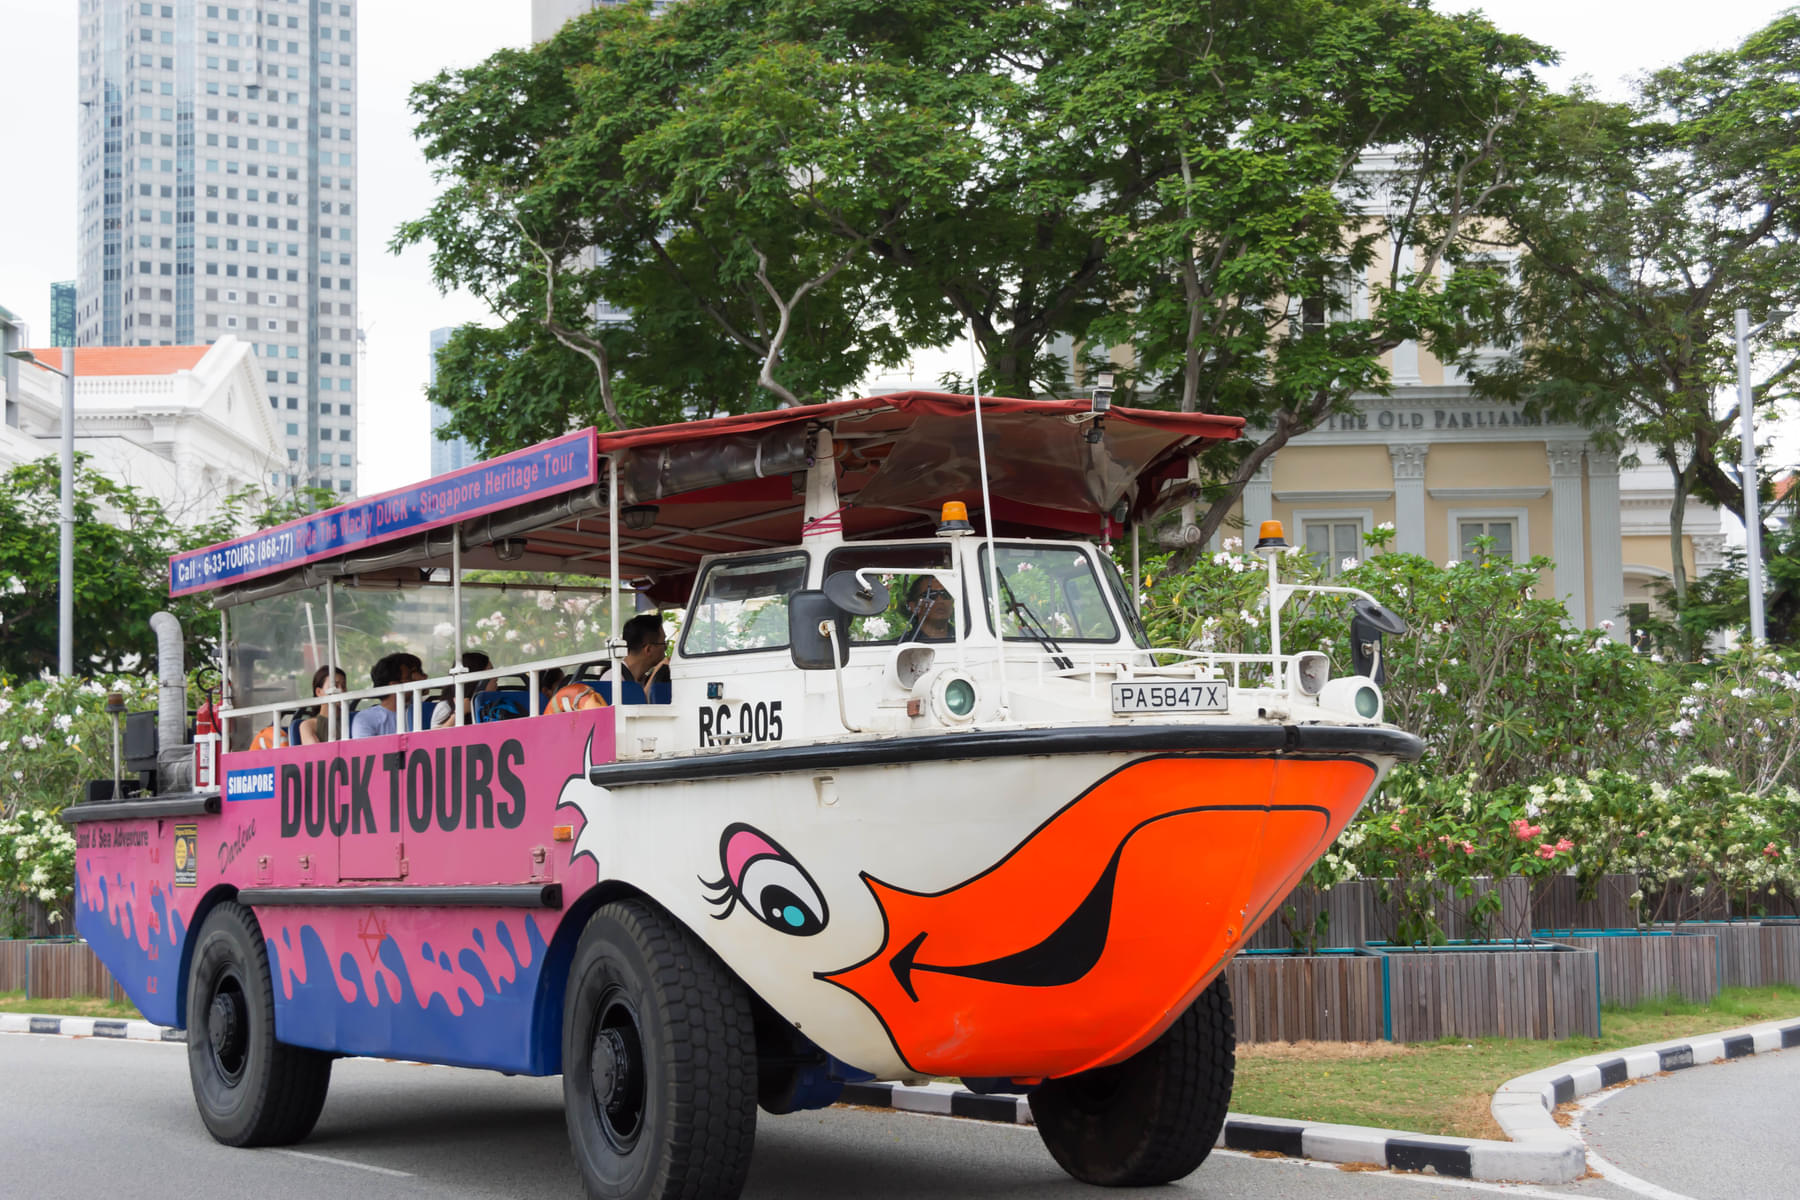 Explore Singapore in a unique way as you ride on an amphibious craft